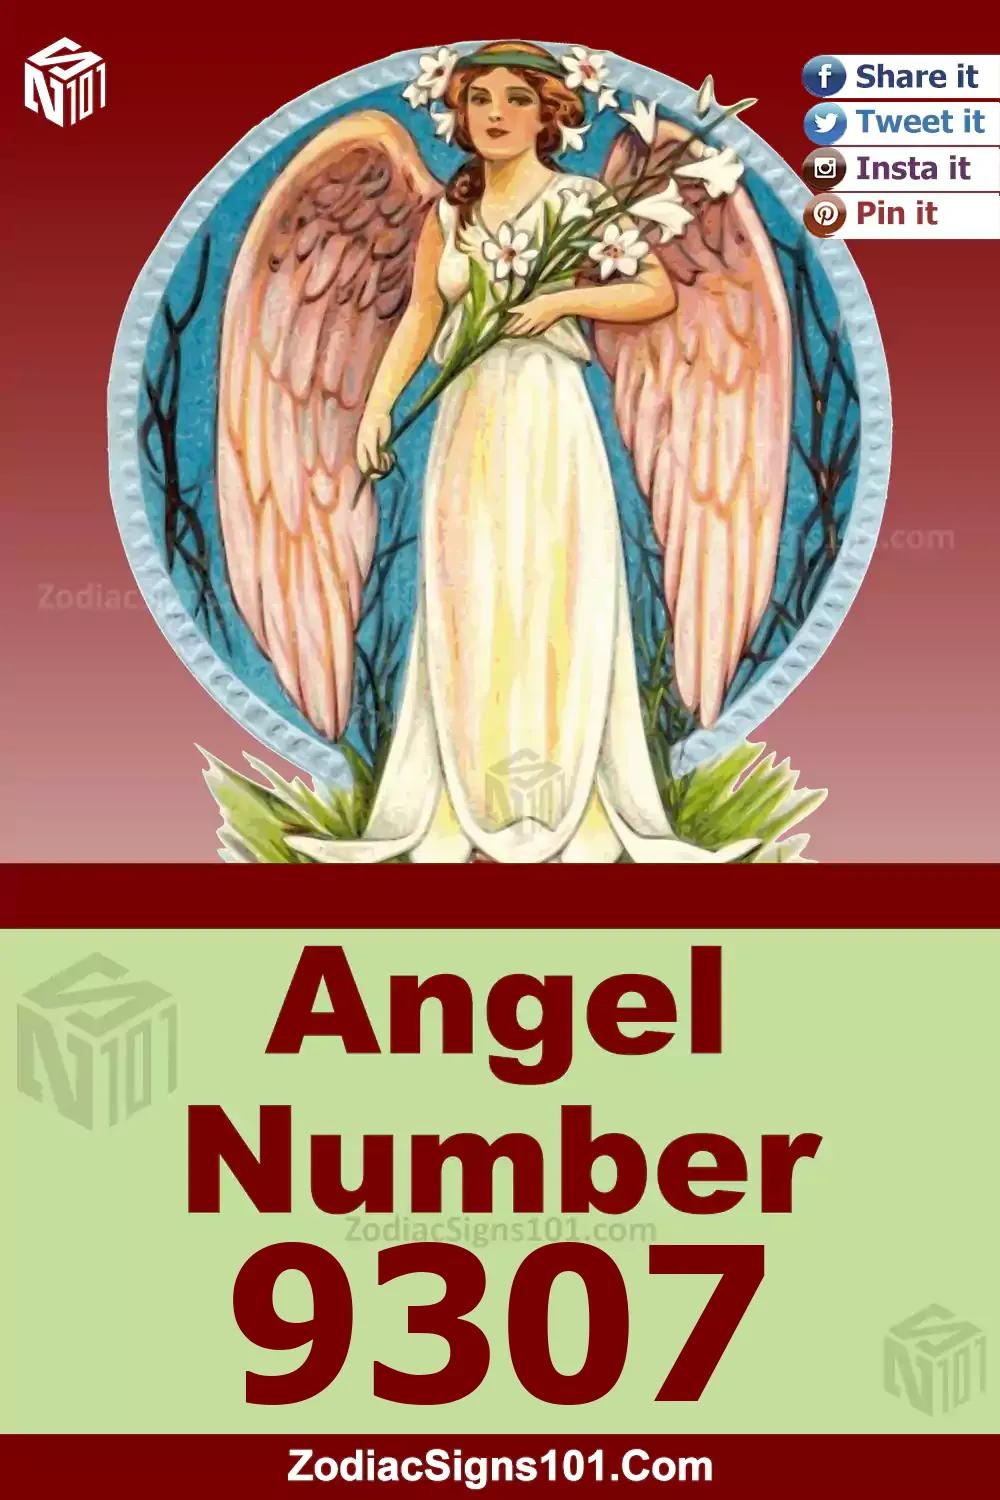 9307 Angel Number Meaning